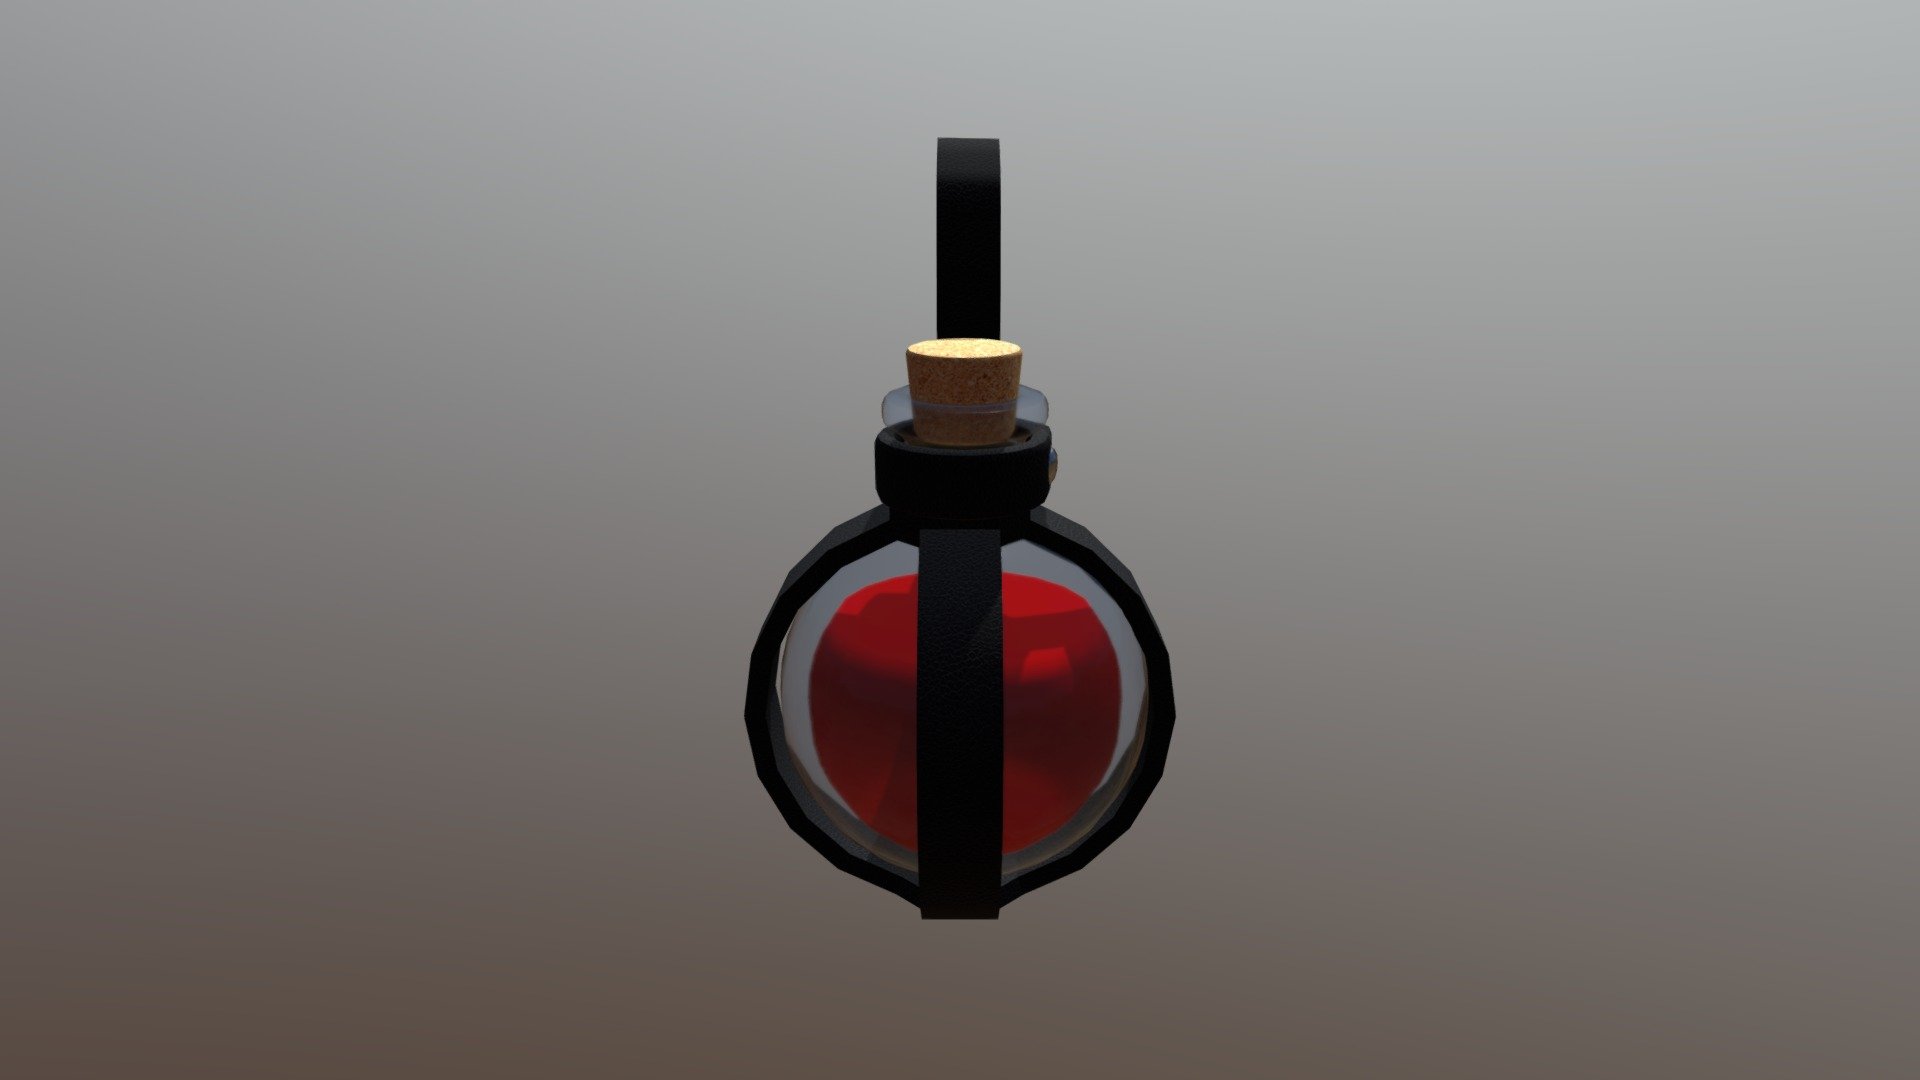 A low-poly potion bottle with leather belt straps 3d model